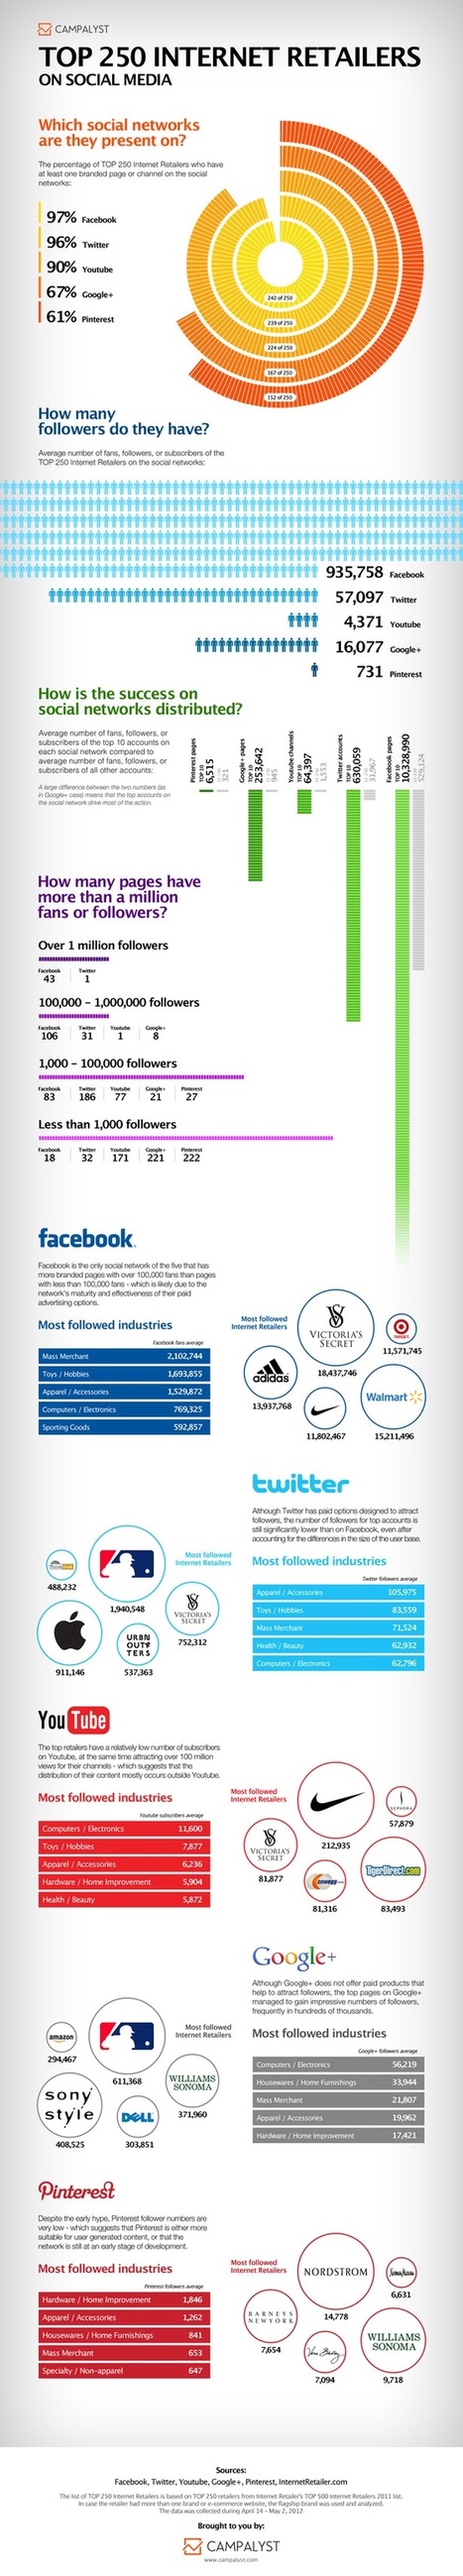 Top Social Internet Retailers [Infographic] | Information Technology & Social Media News | Scoop.it